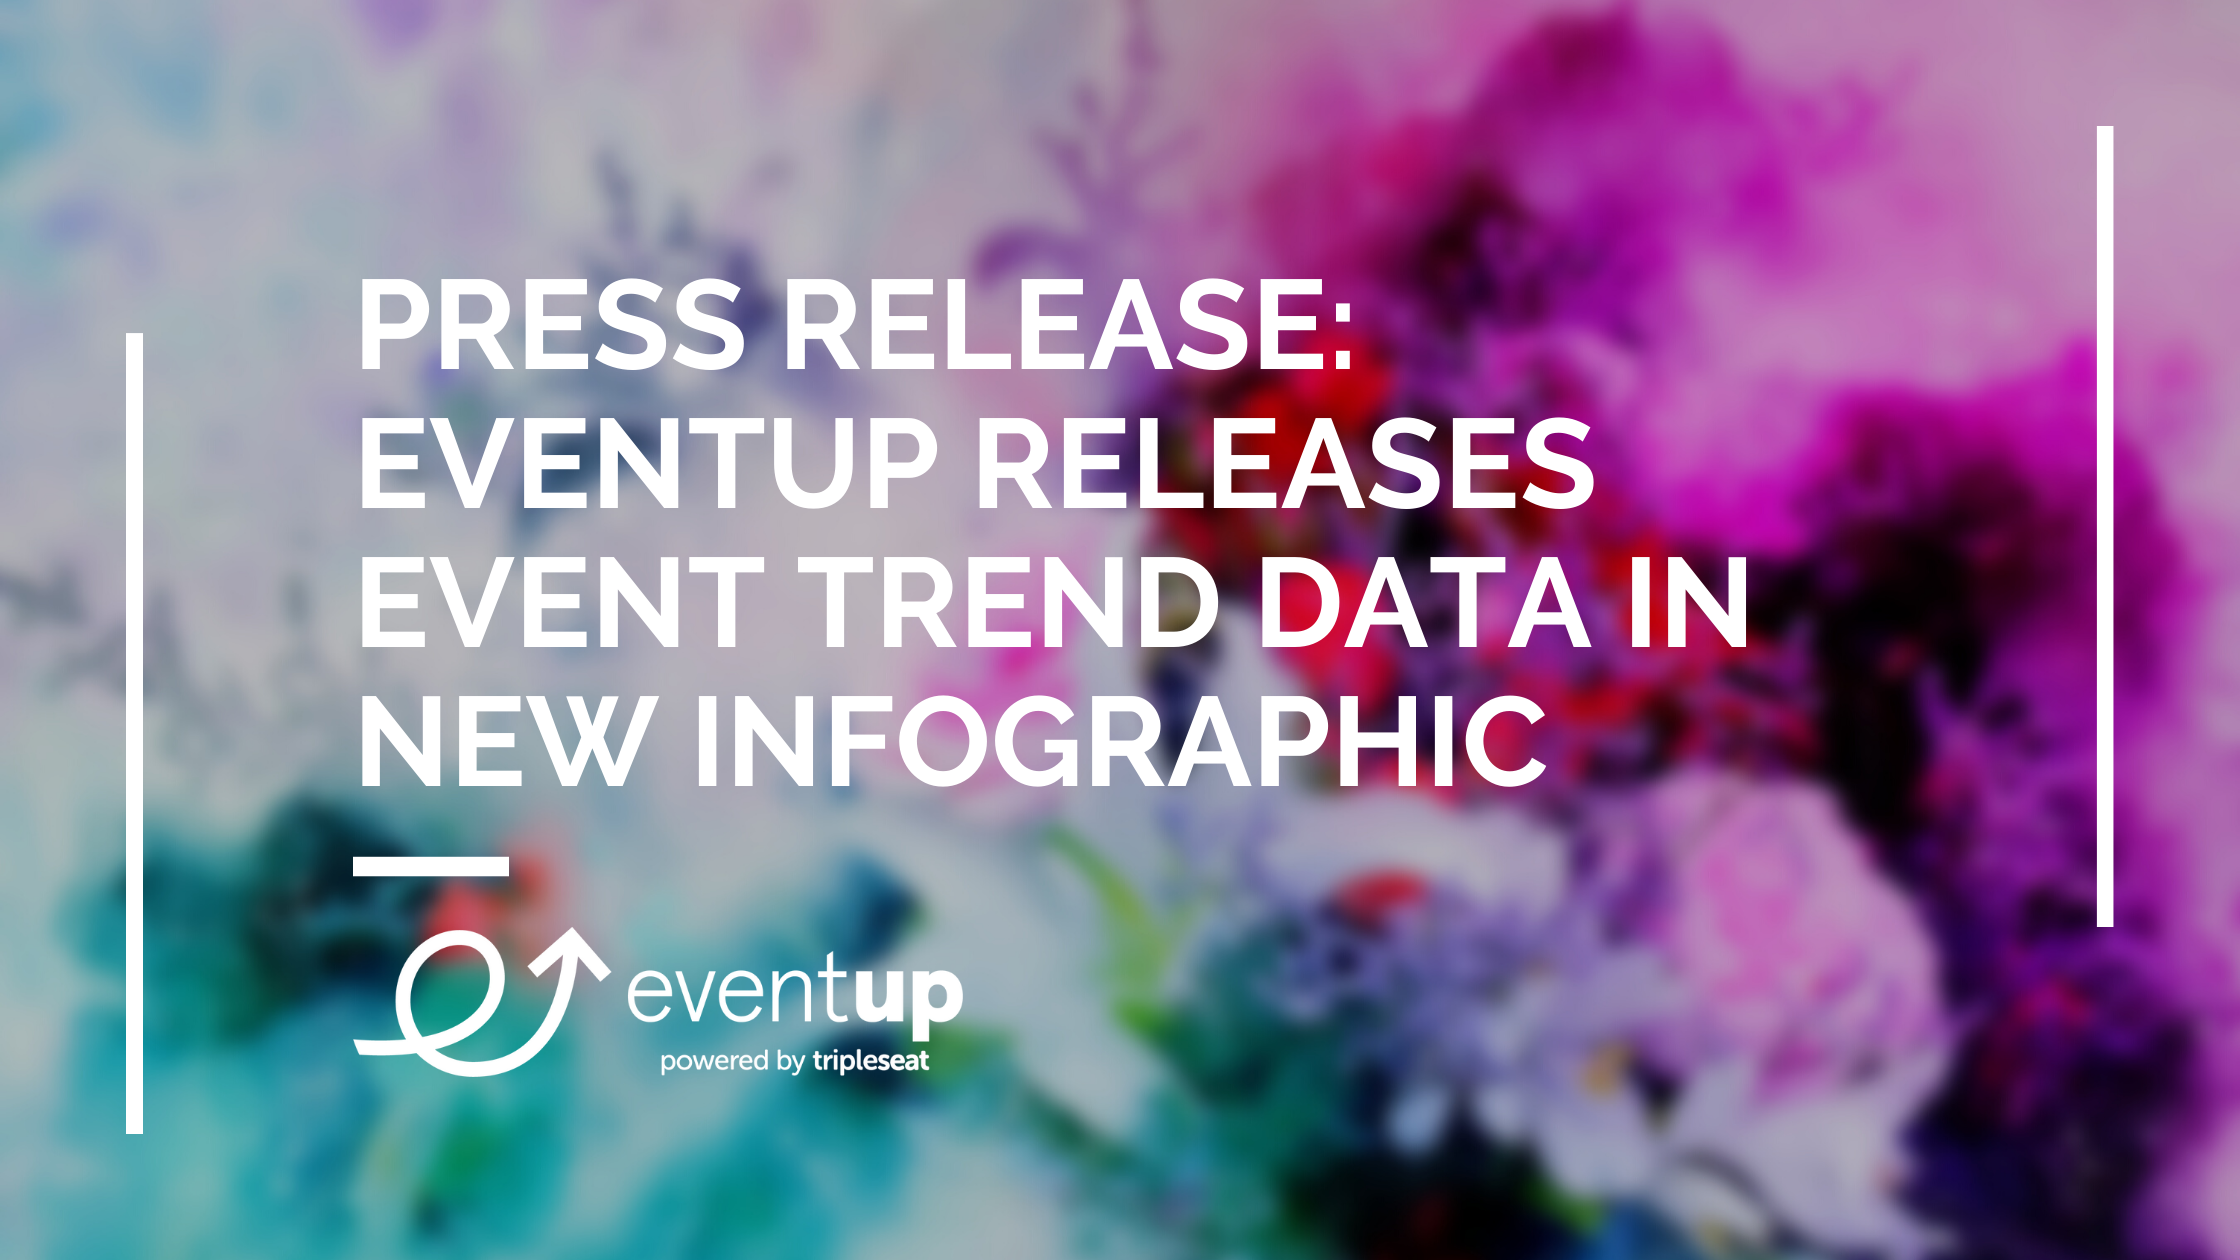 Press Release: EventUp Releases Event Trend Data in New Infographic